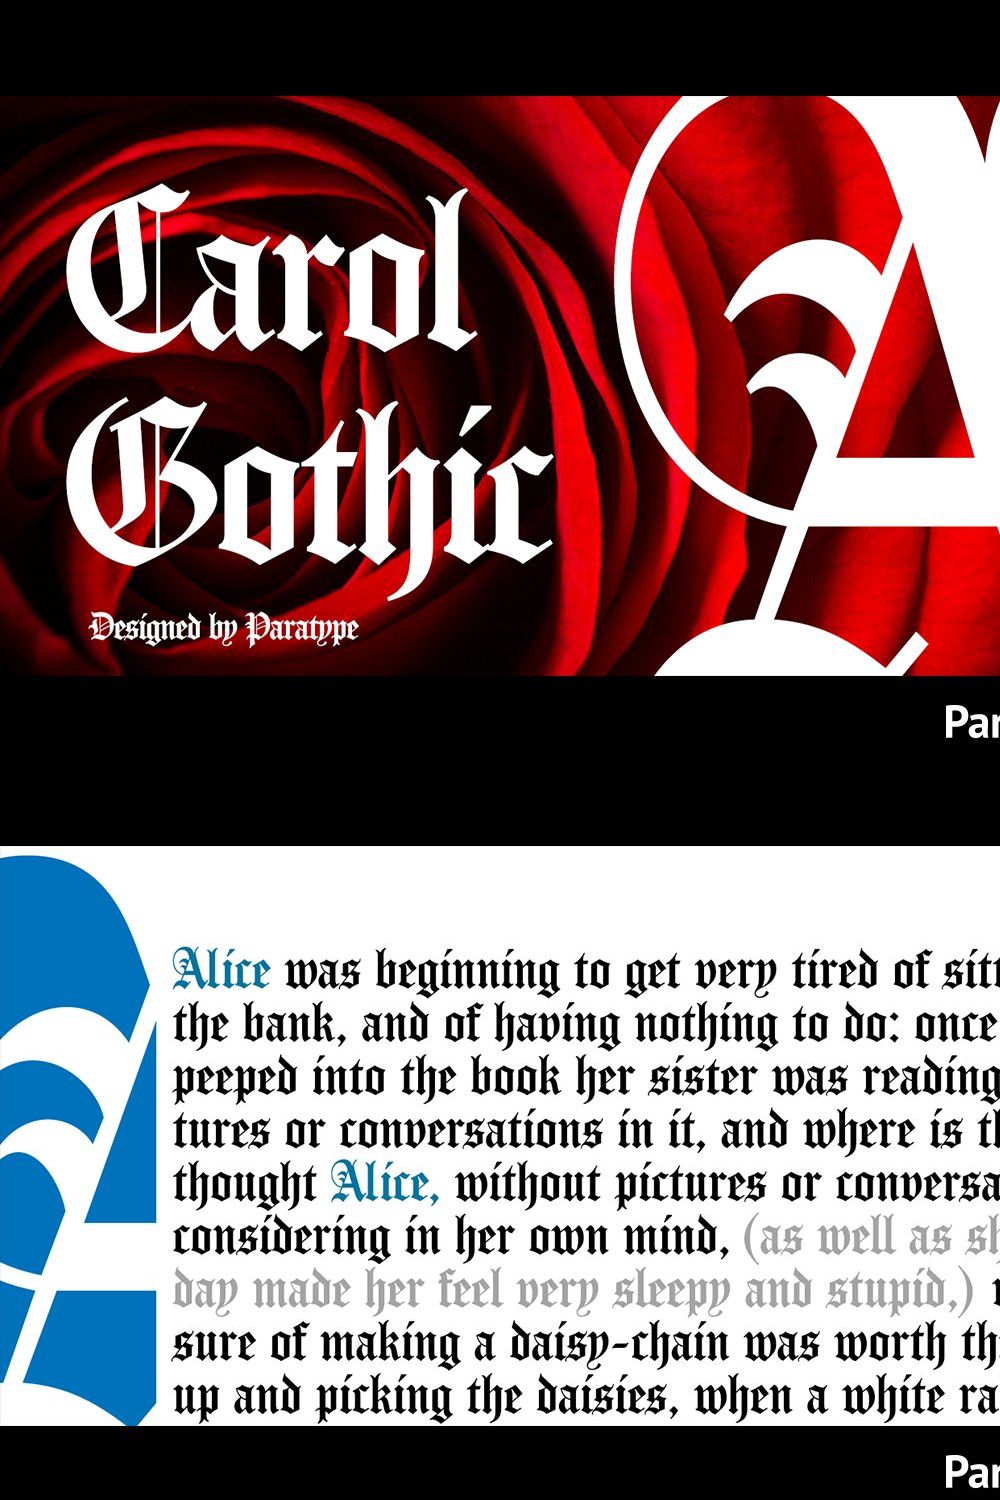 Carol Gothic pinterest preview image.